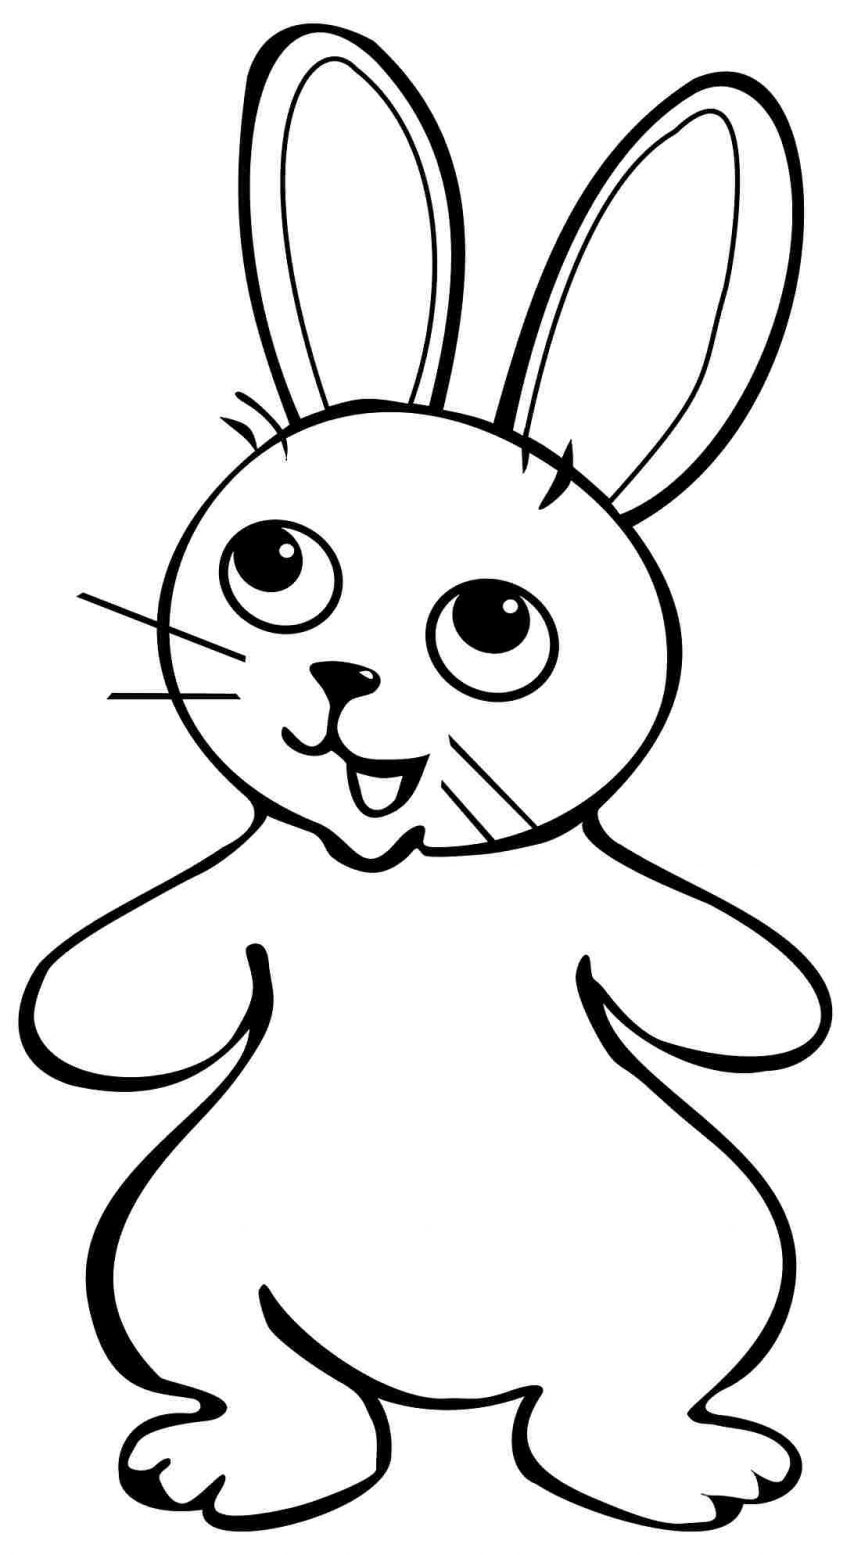 rabbit color pages bunny coloring pages best coloring pages for kids rabbit color pages 